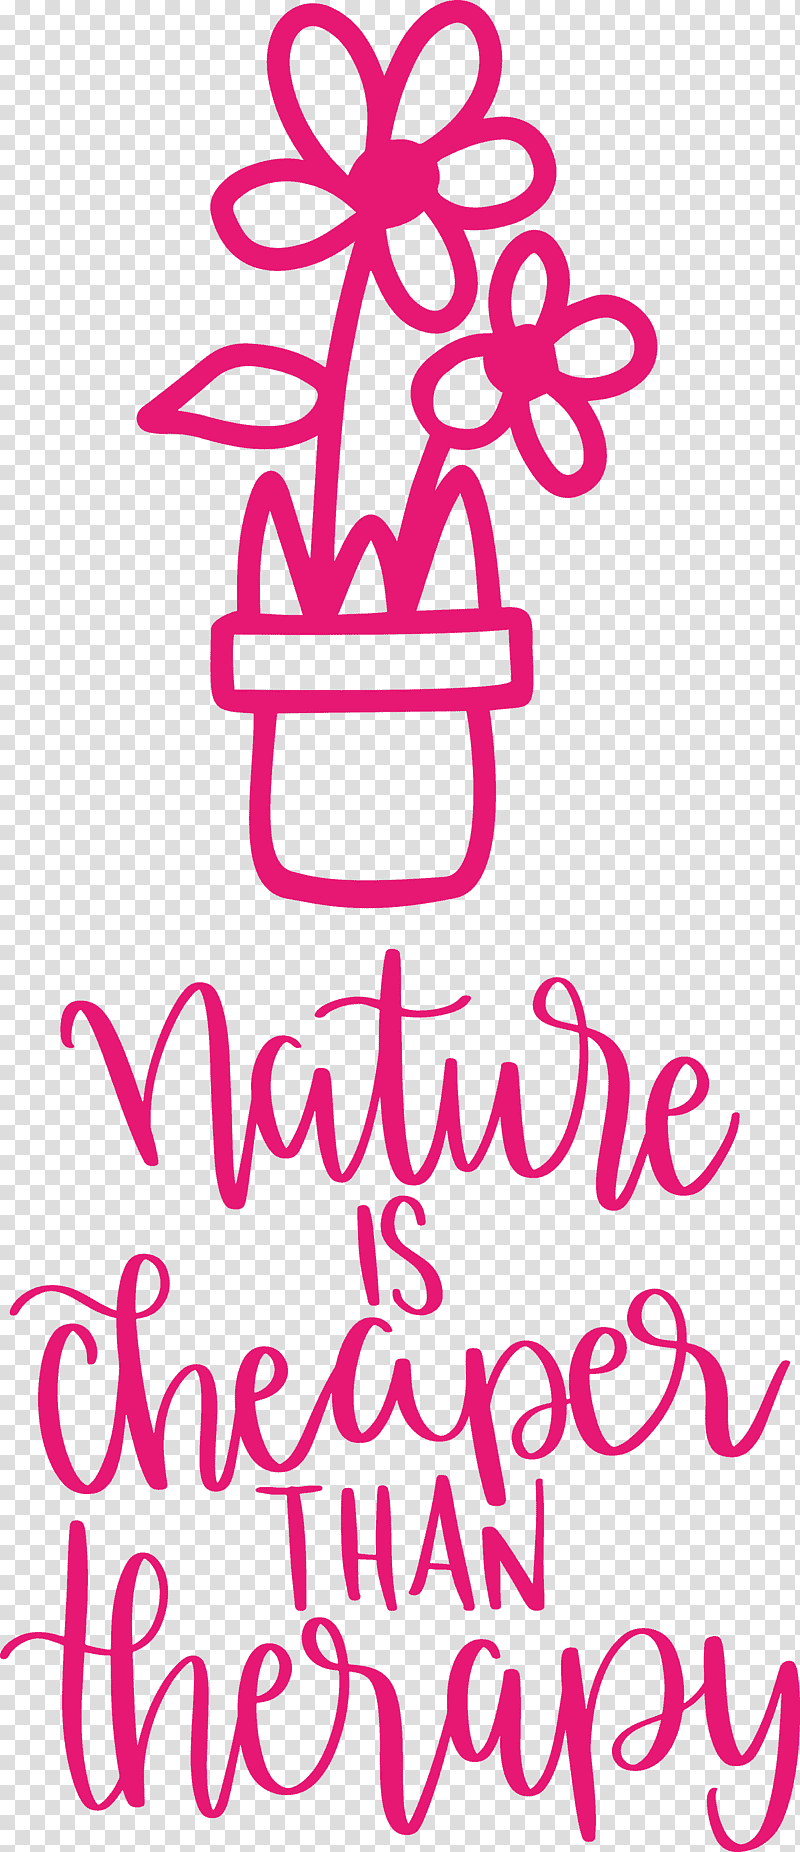 Nature Is Cheaper Than Therapy Nature, Cricut, Music , Fishing transparent background PNG clipart